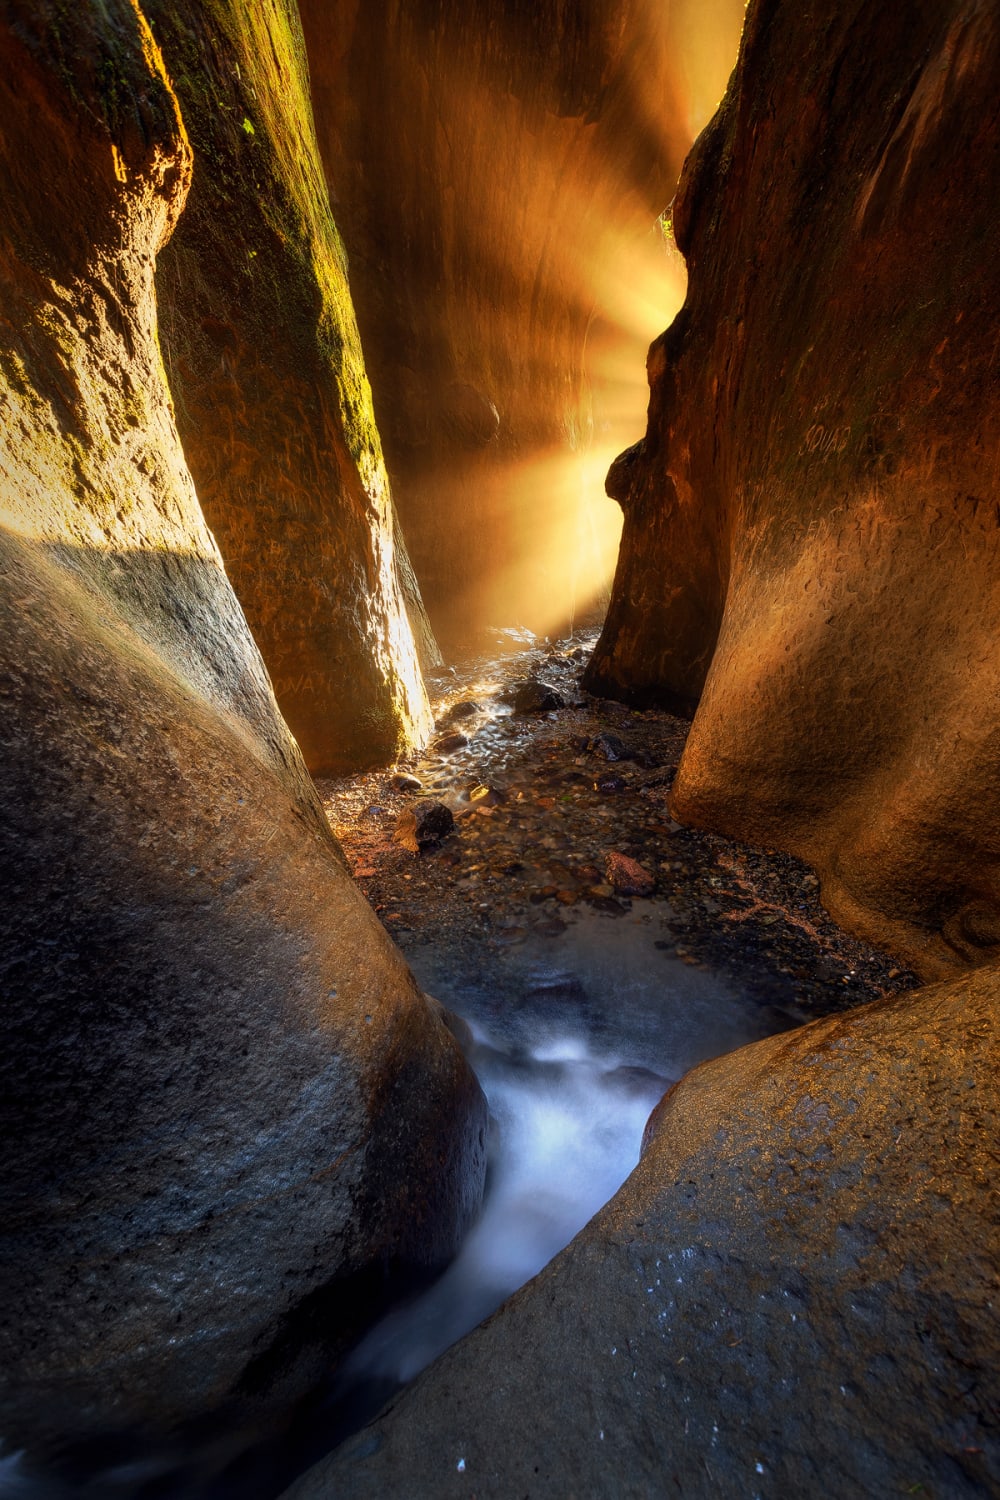 For only a brief period of the year the setting sun lines up perfectly with this slot canyon and creates some amazing light rays. Vancouver Island, BC IG:@Jay.Klassy